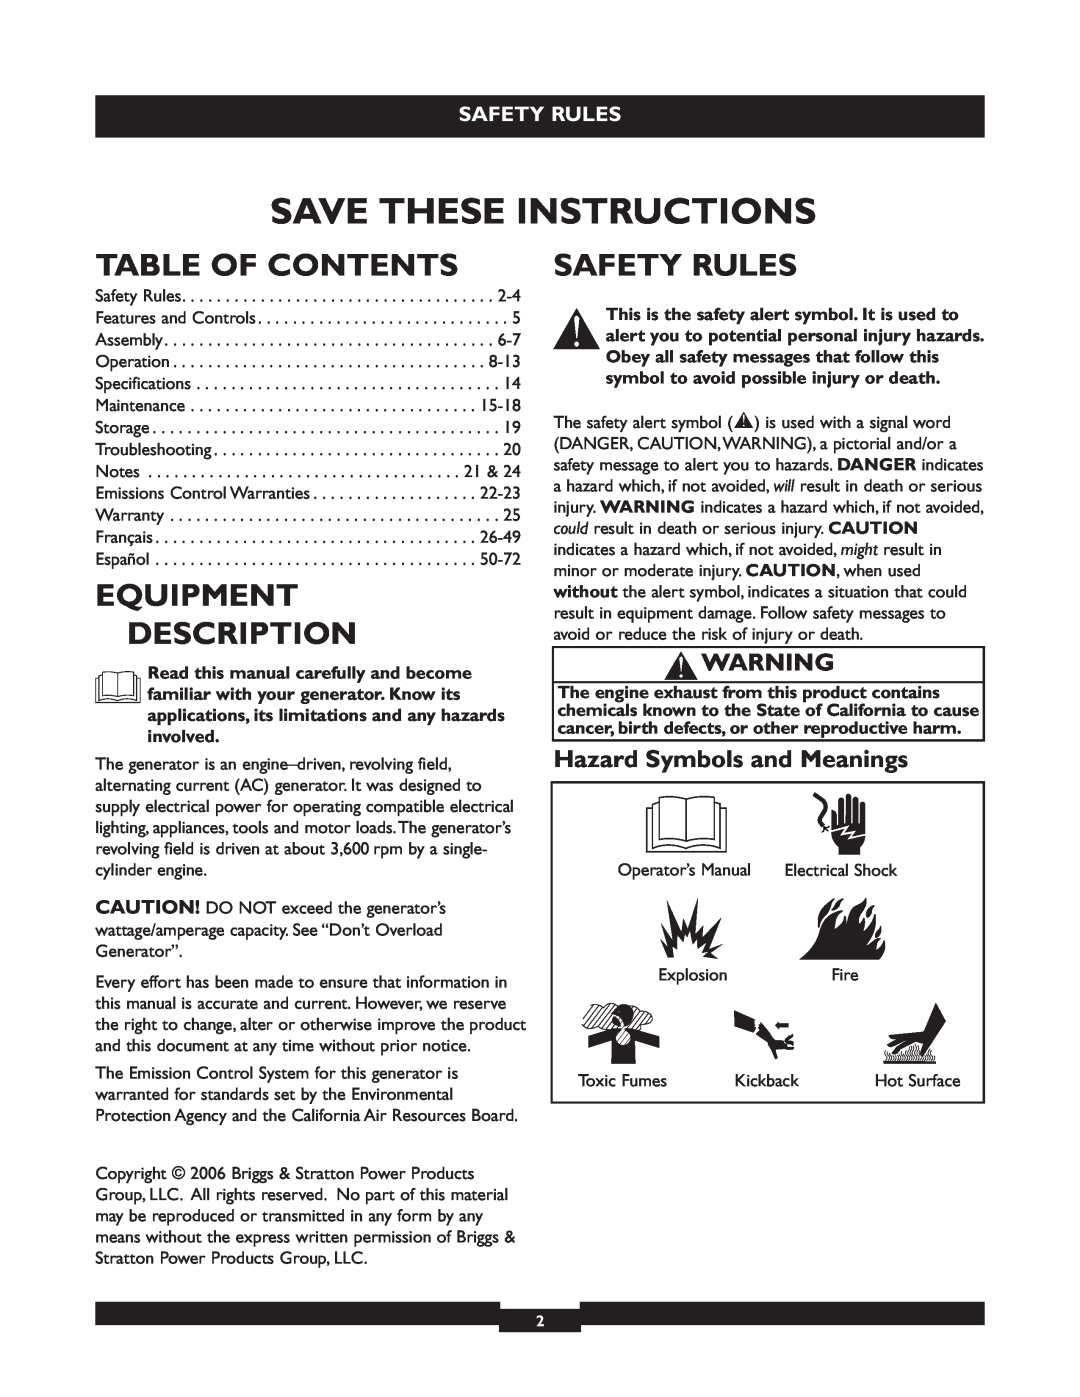 Briggs & Stratton 30236 Table Of Contents, Equipment Description, Safety Rules, Hazard Symbols and Meanings 